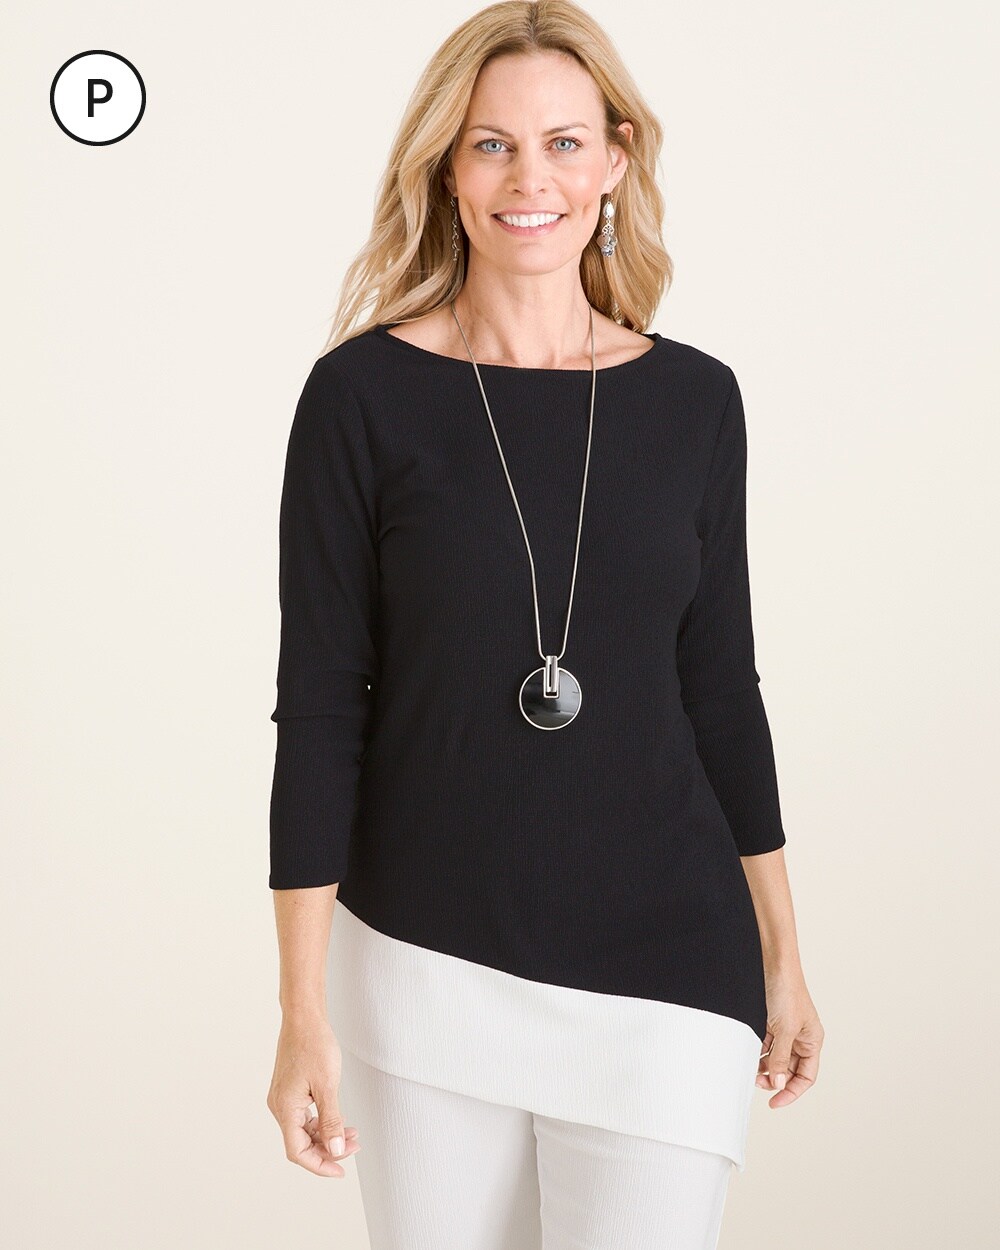 Travelers Collection Petite Lightweight Colorblock Top